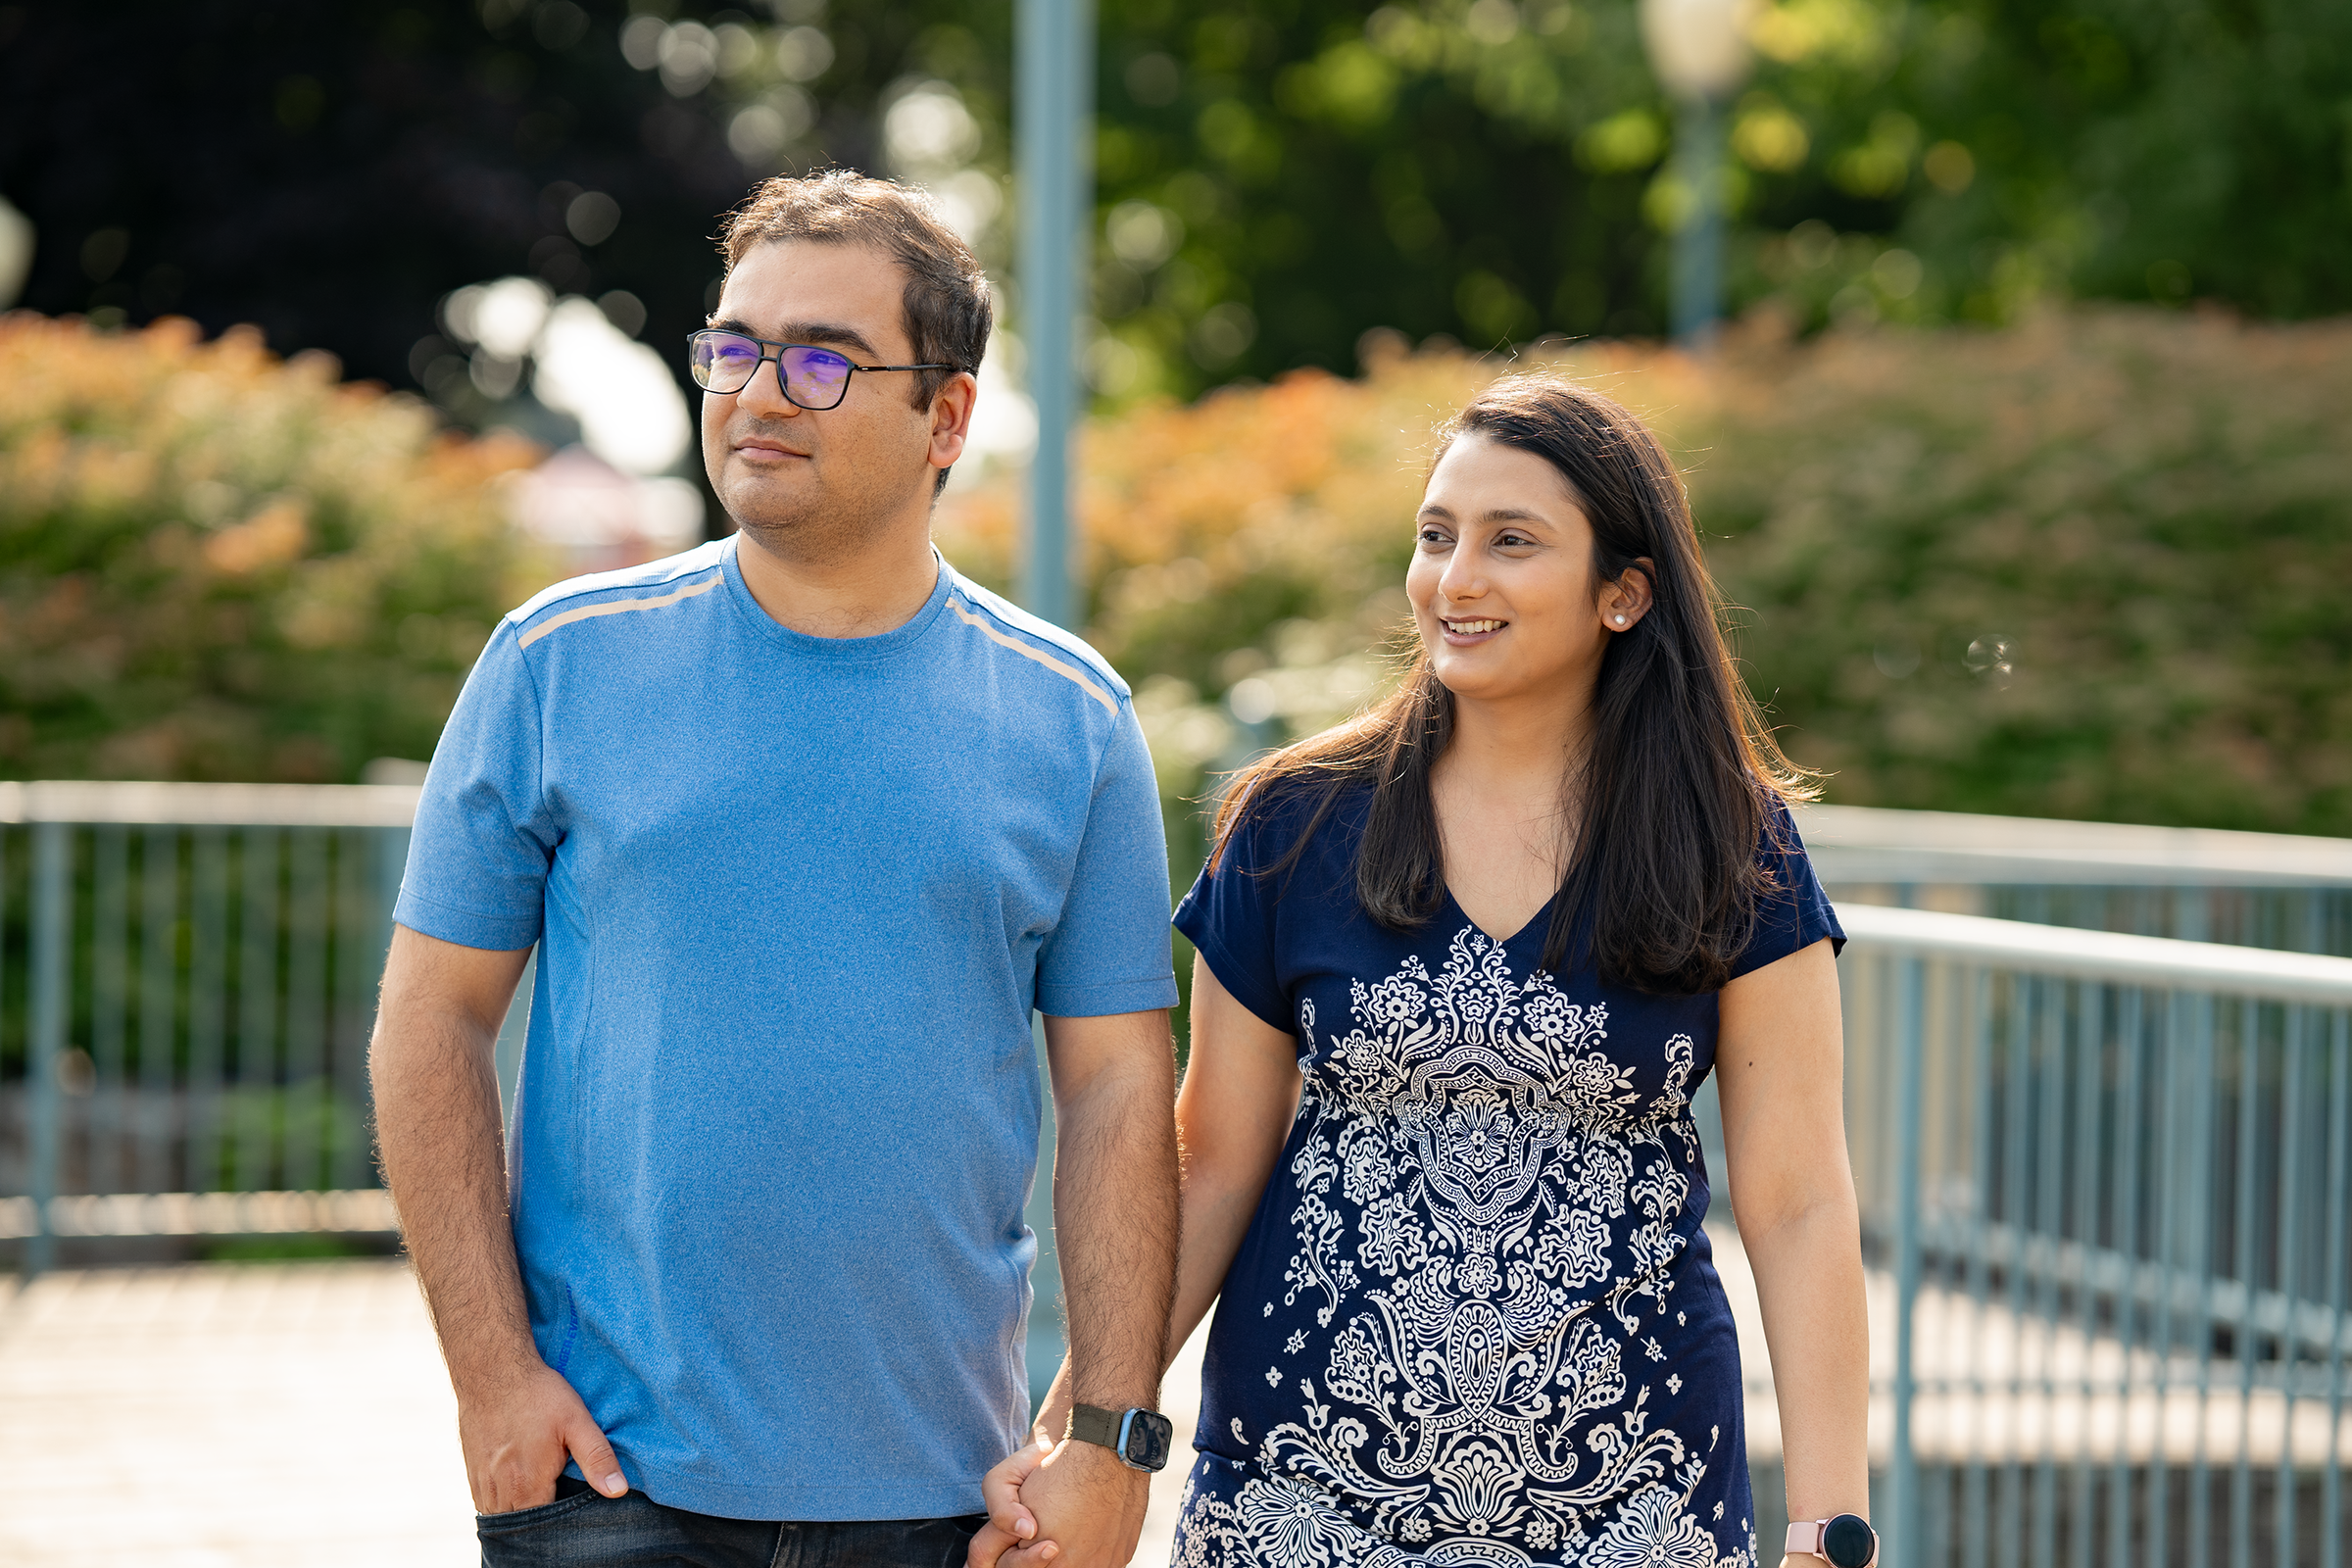 Shivali and her husband walking in the park in Brockville.